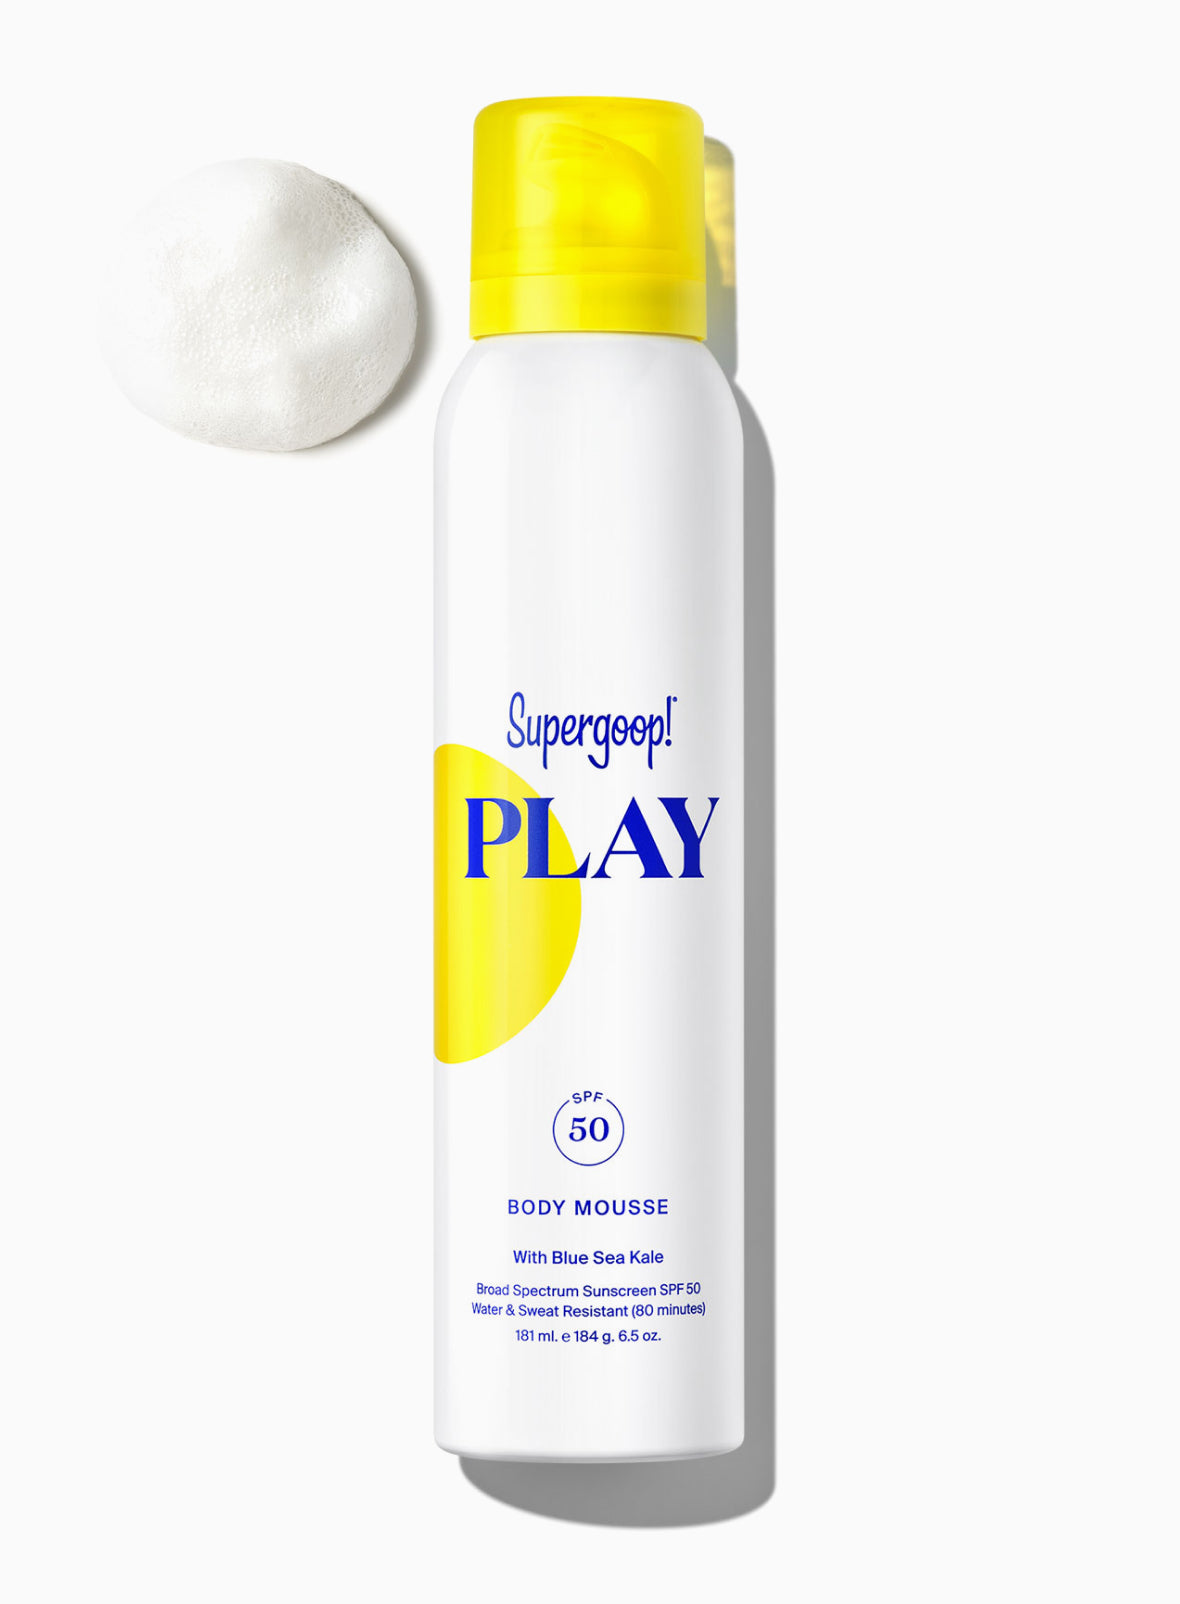 PLAY Body Mousse SPF 50 Sunscreen 6.5 oz. | Supergoop!